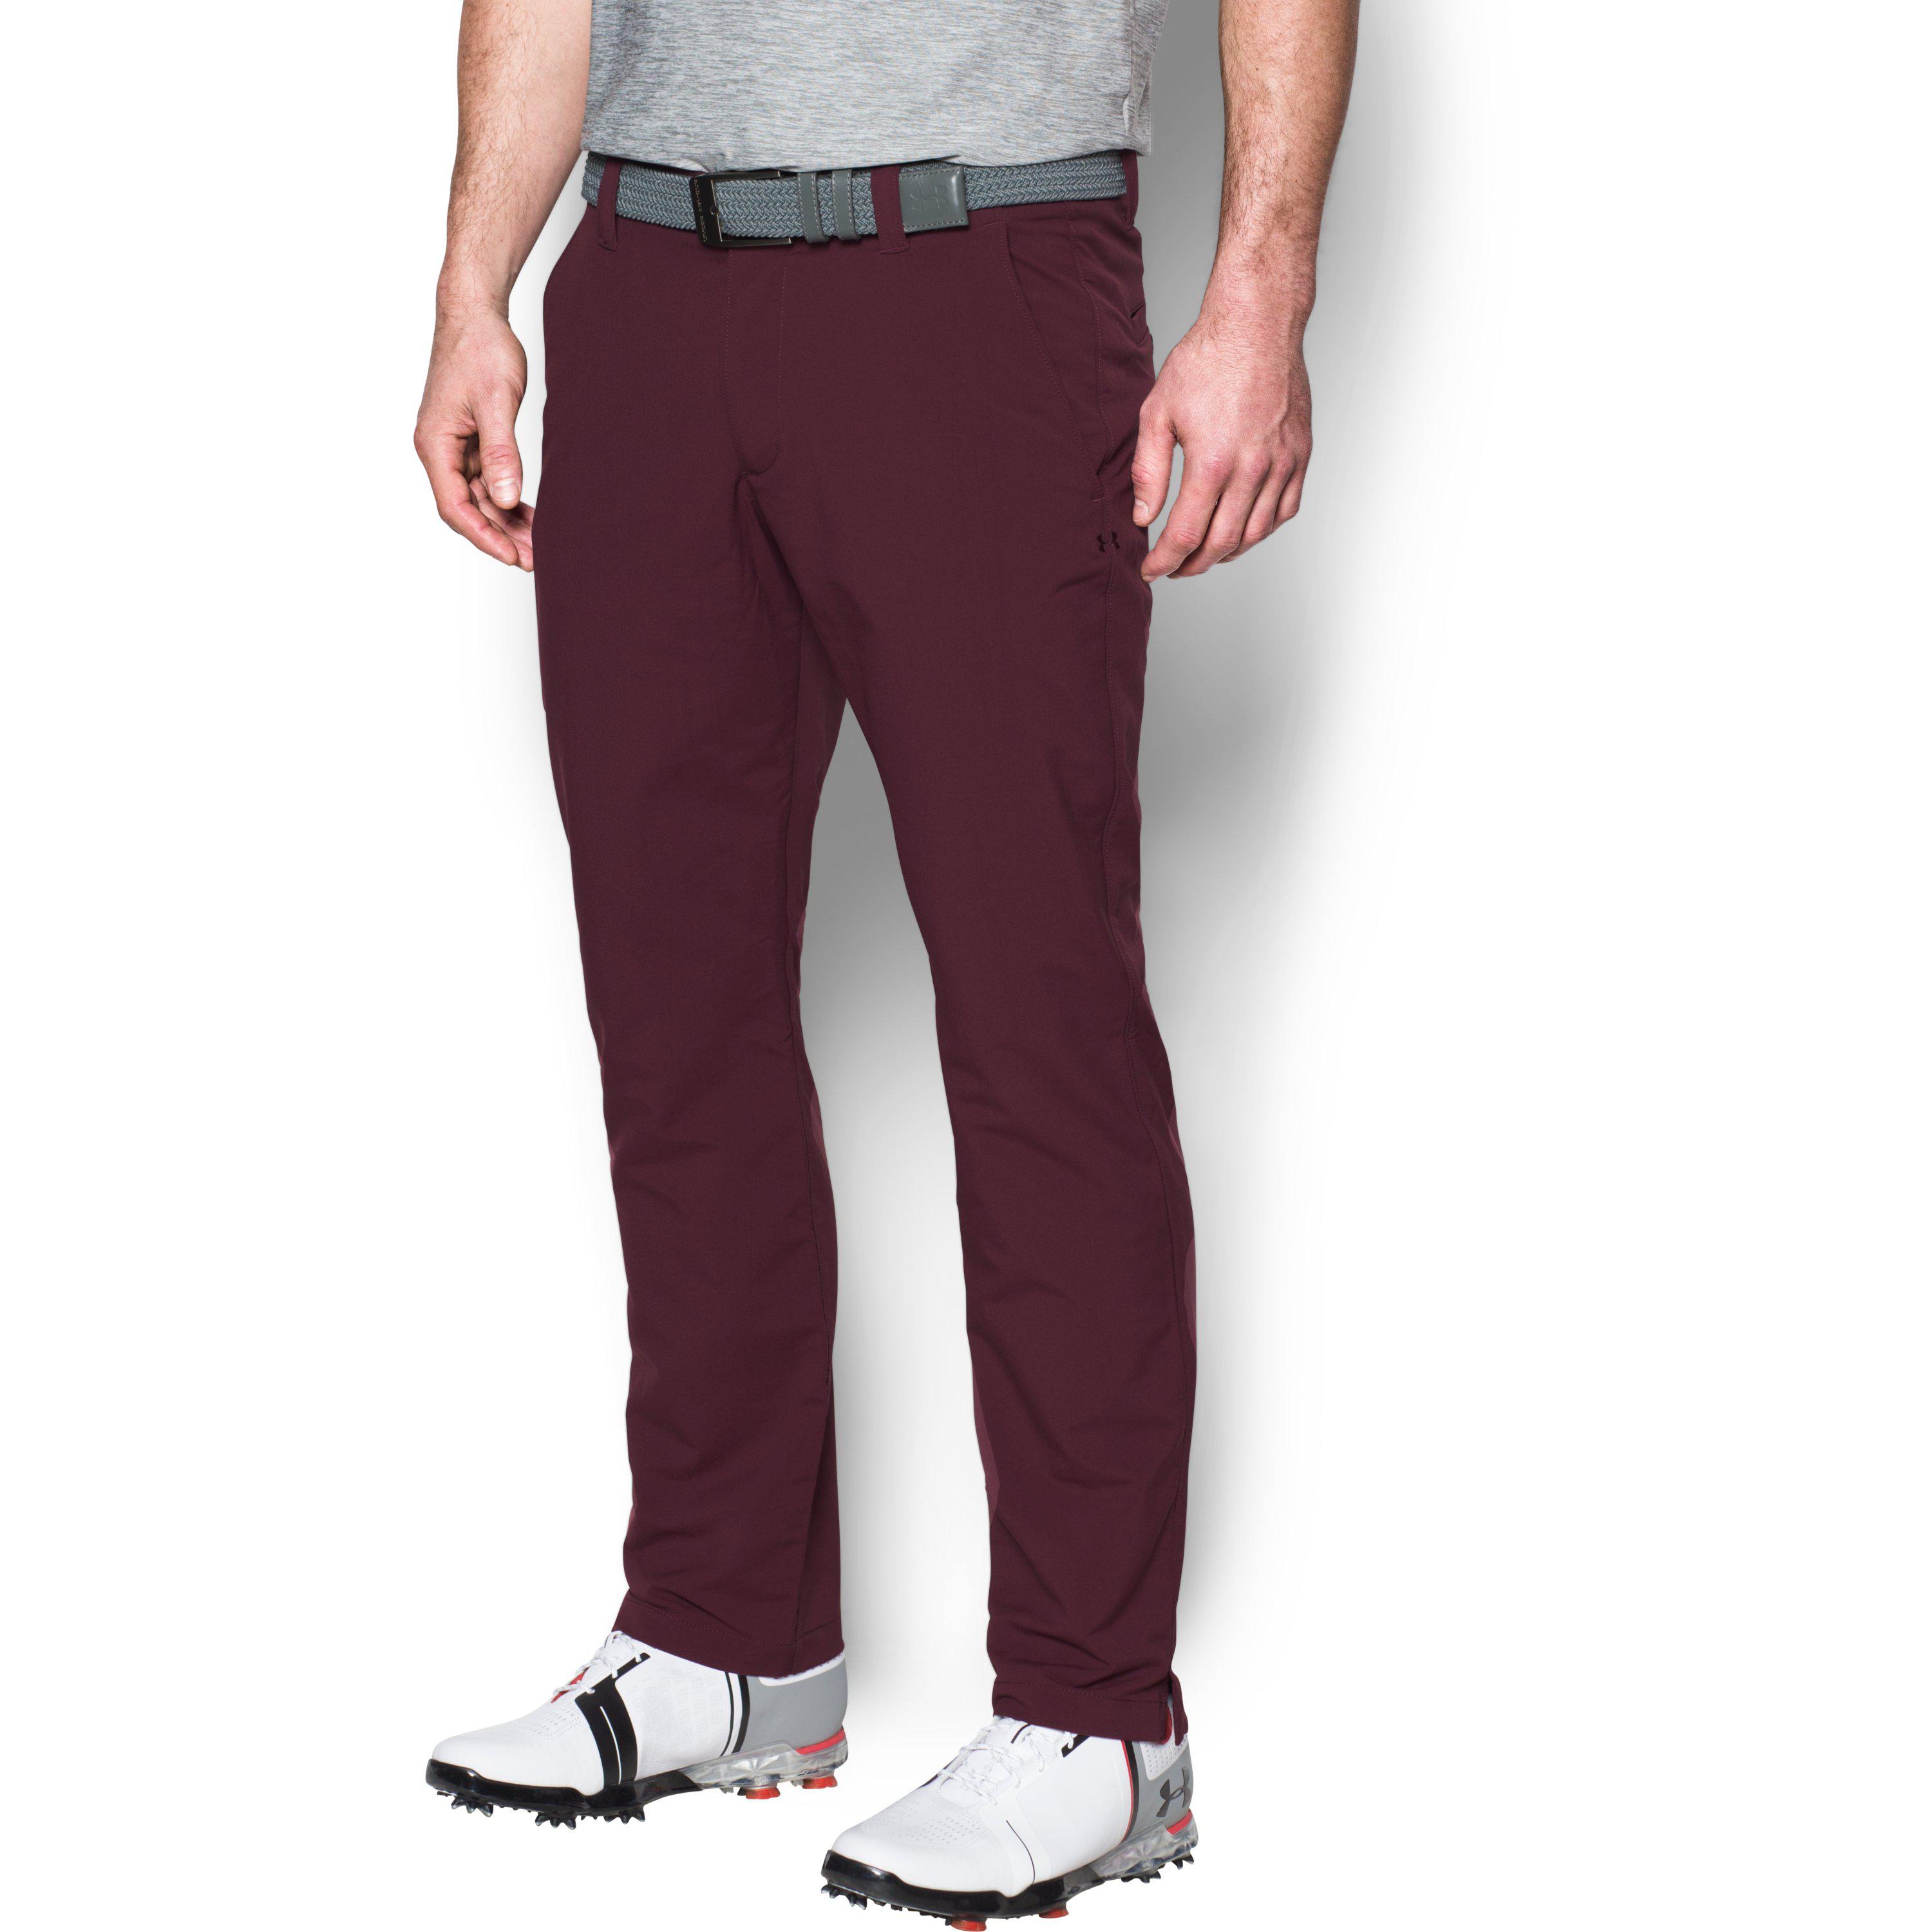 Under Armour Men's Ua Match Play Tapered Golf Pants for Men